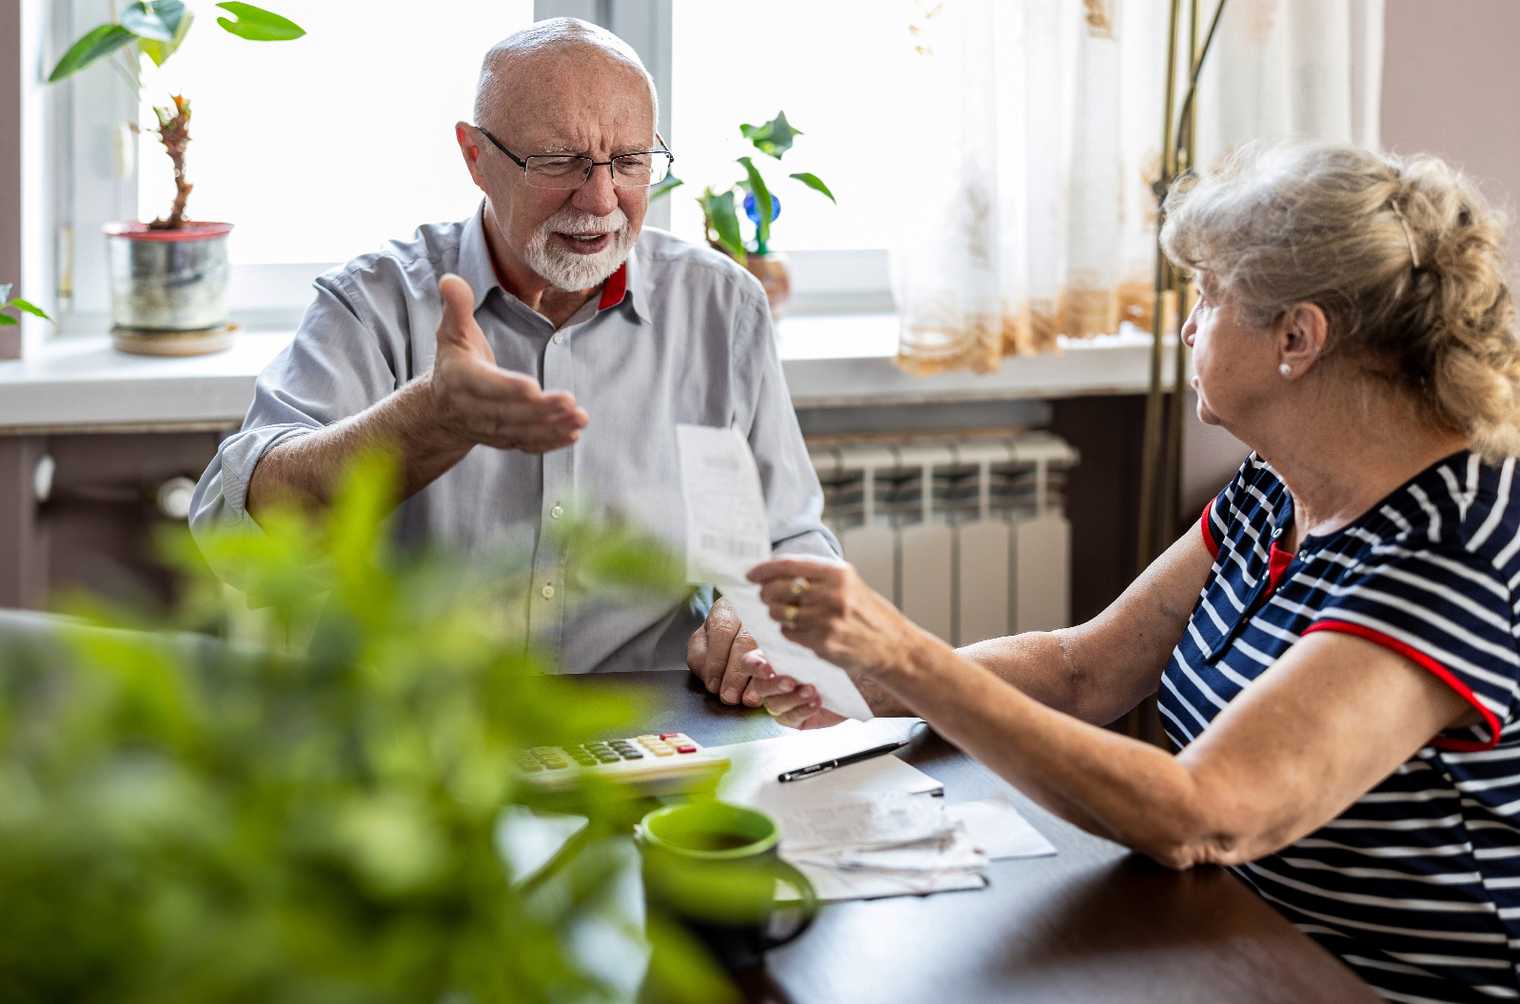 Two retirees discuss their financial situation over the kitchen table